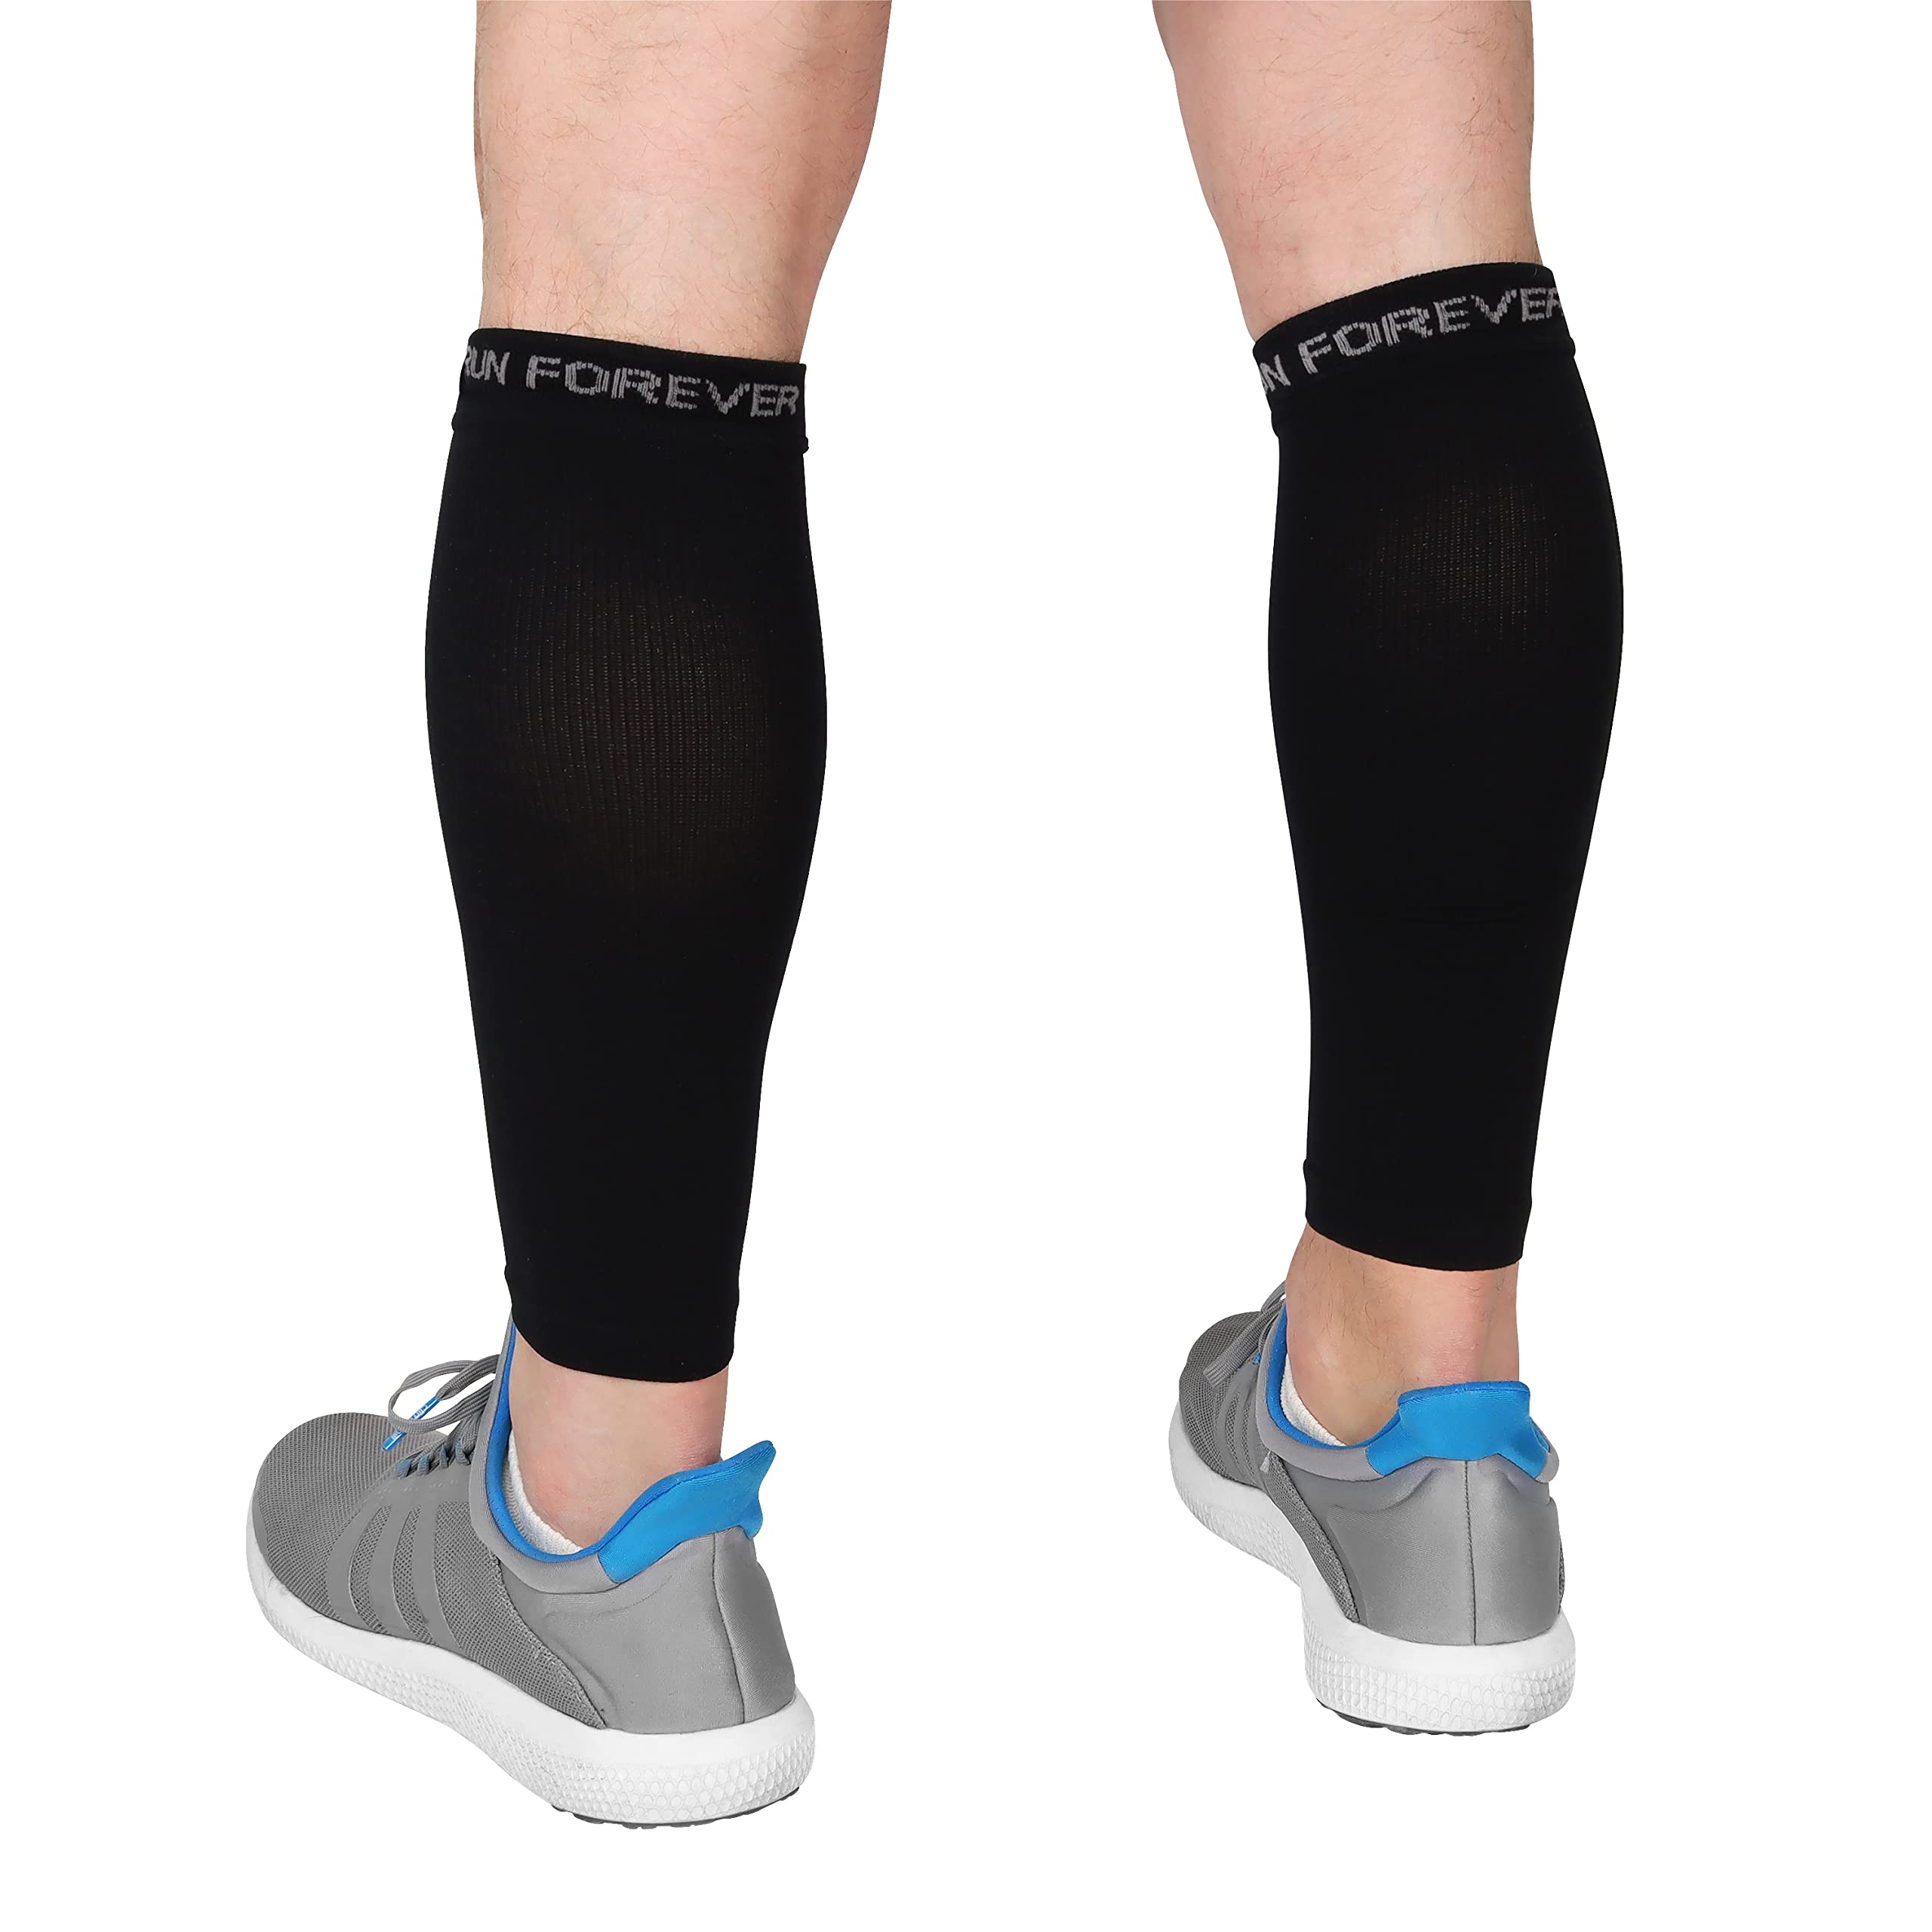 Run Forever Calf Compression Sleeves For Men And Women - Leg Compression Sleeve - Calf Brace For Running, Cycling, Travel